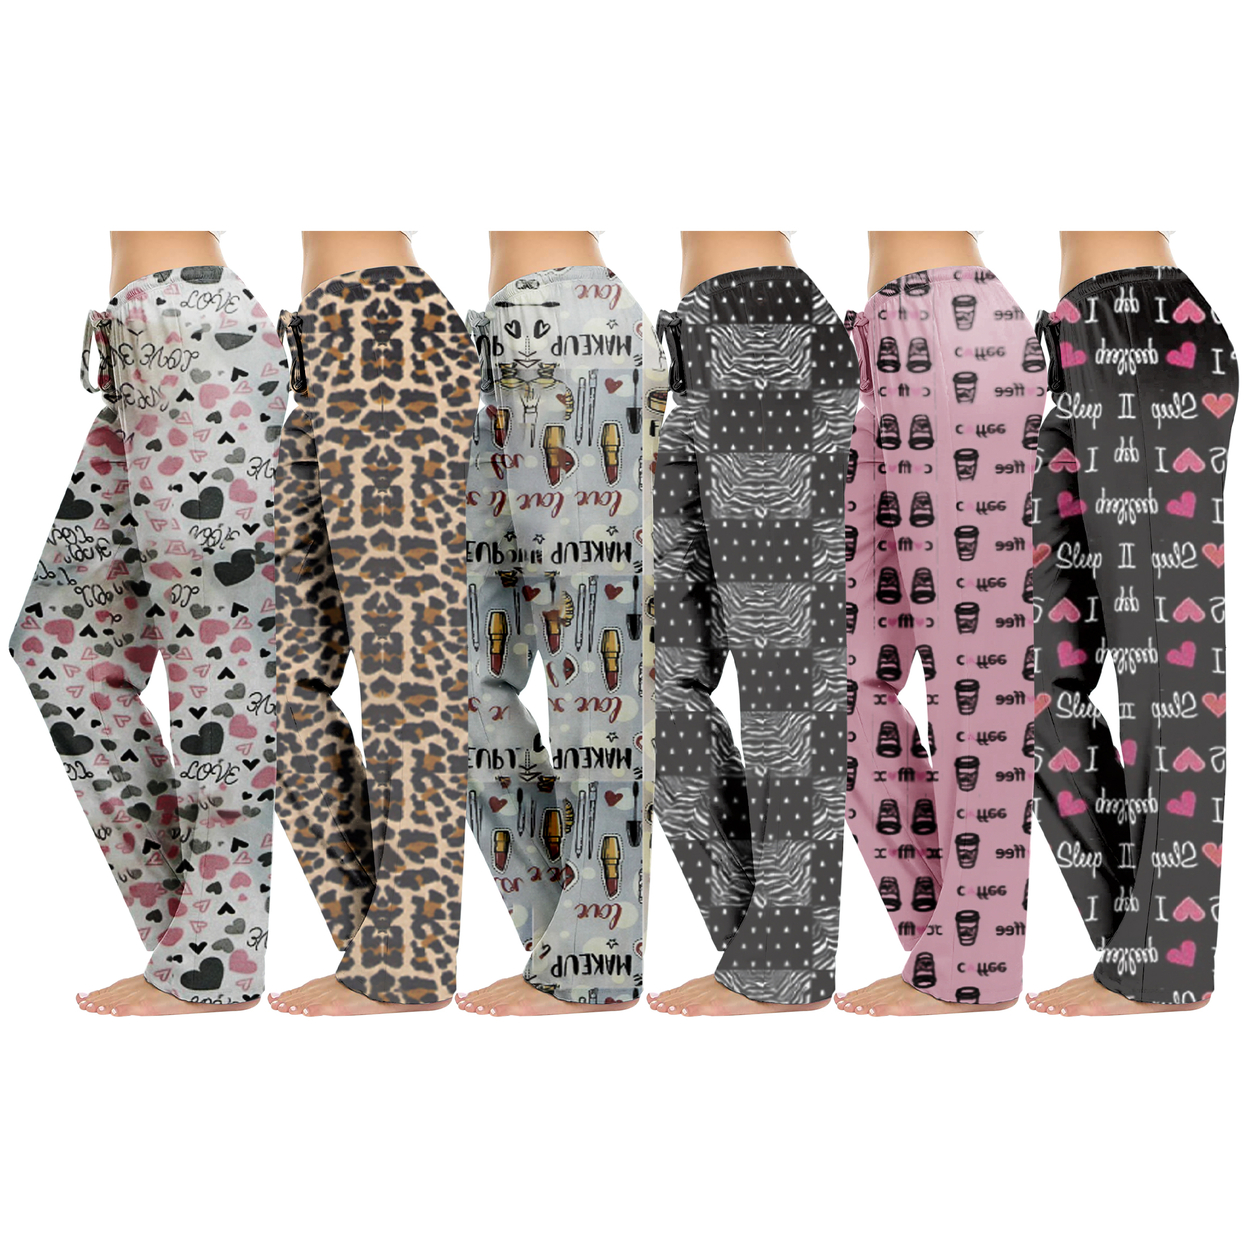 2-Pack: Women's Casual Fun Printed Lightweight Lounge Terry Knit Pajama Bottom Pants - Large, Shapes